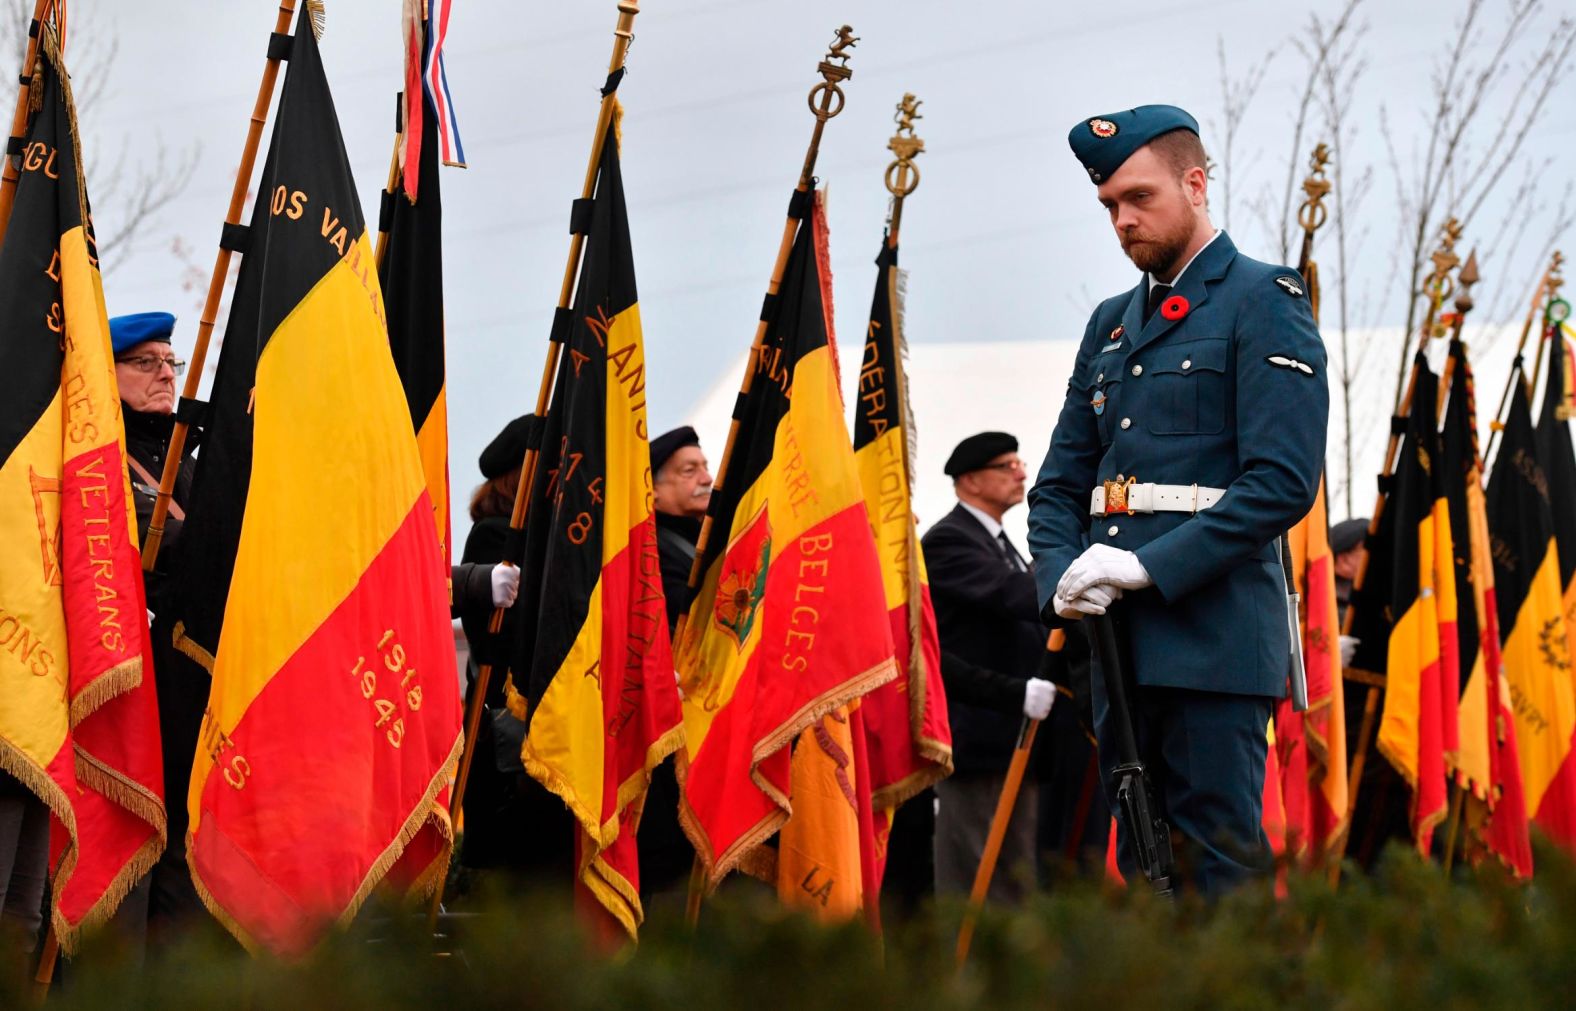 A Canadian soldier attends the unveiling of a monument for Canadian World War I soldier George Lawrence Price in Le Roeulx, Belgium, on November 10. Price was the last Canadian soldier to die in World War I, shot just minutes before the armistice.